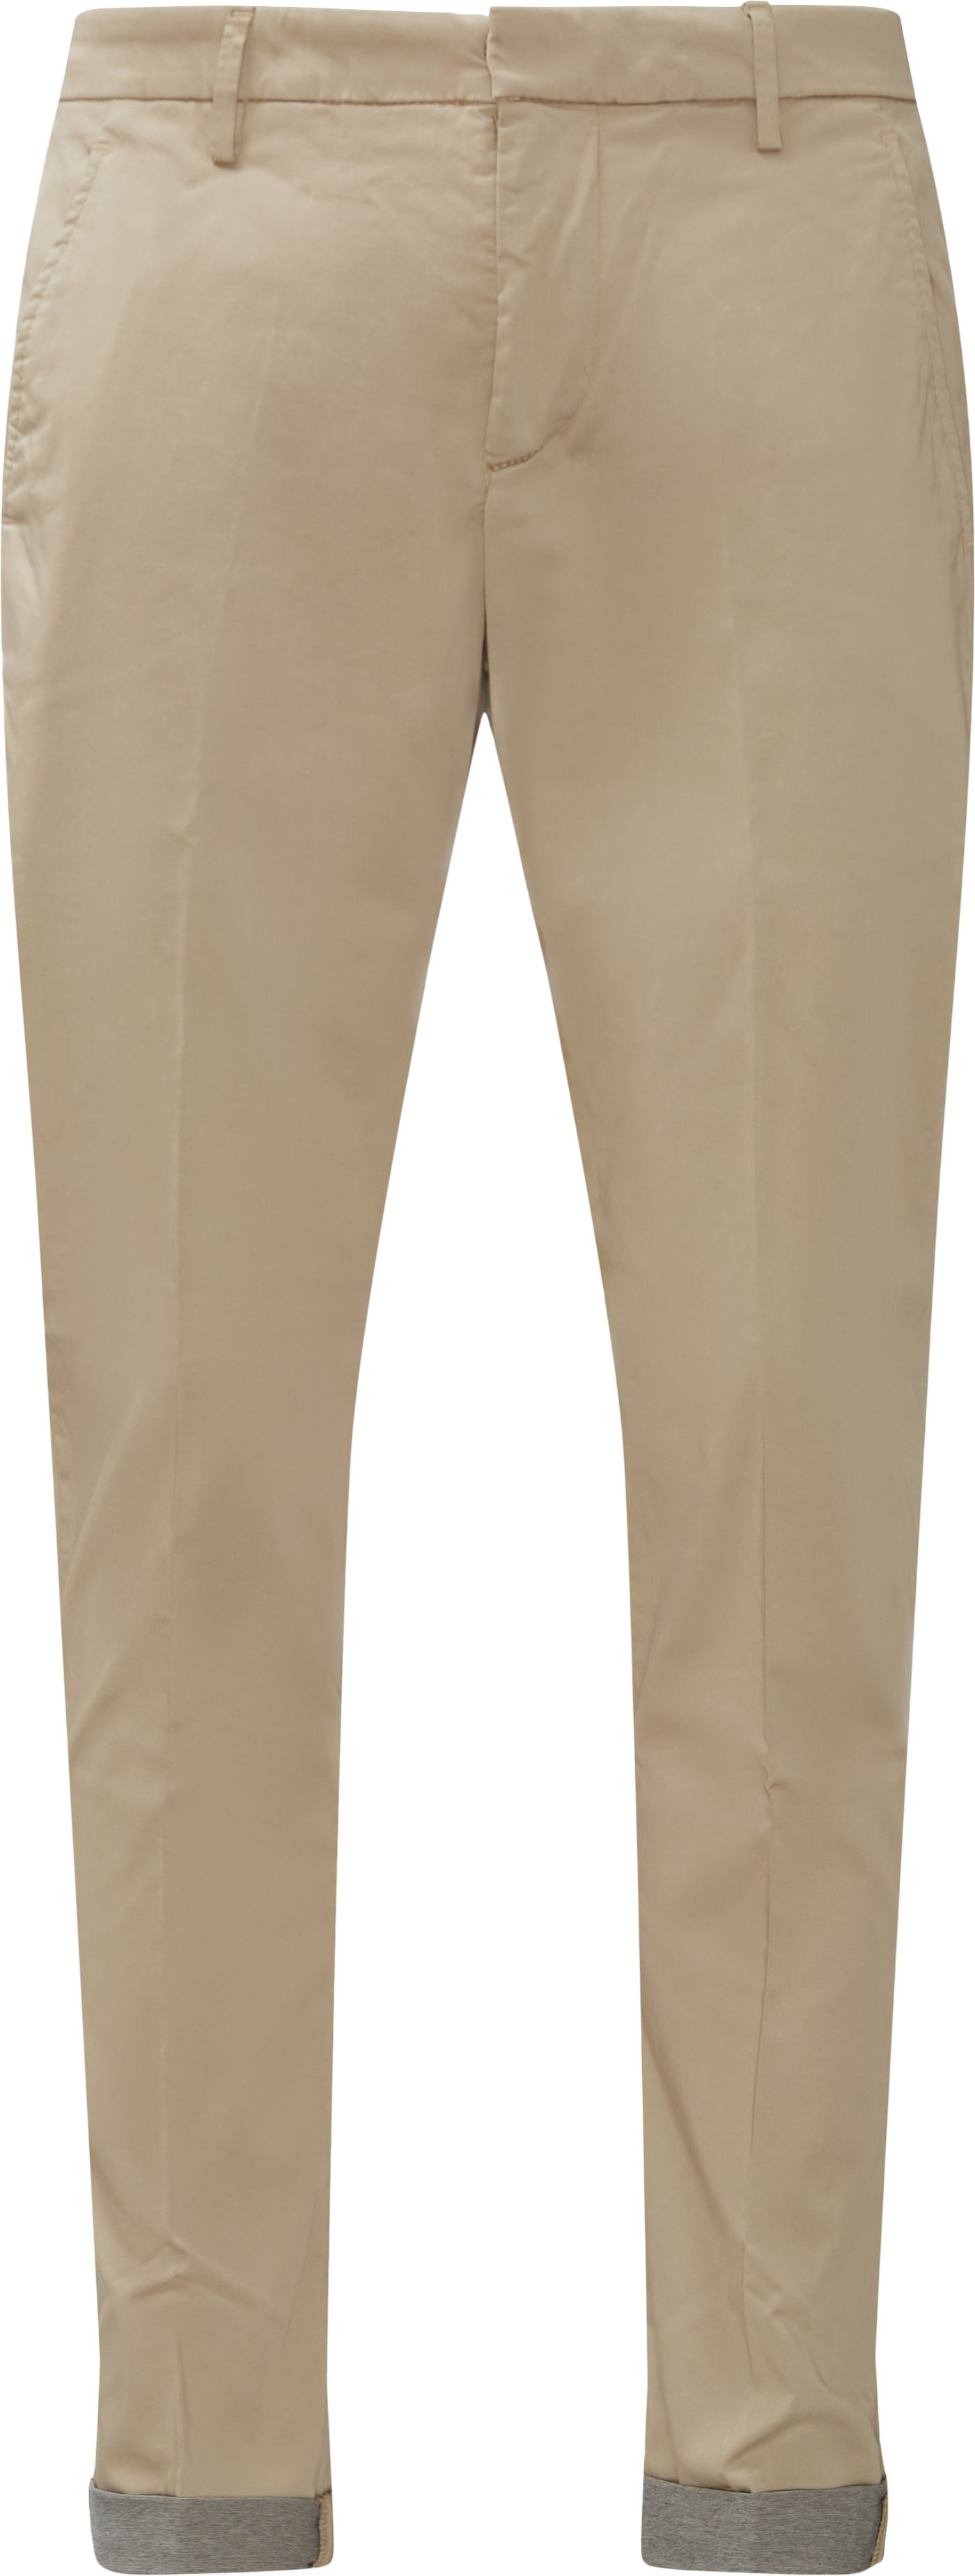 Classic Chino - Trousers - Slim fit - Sand